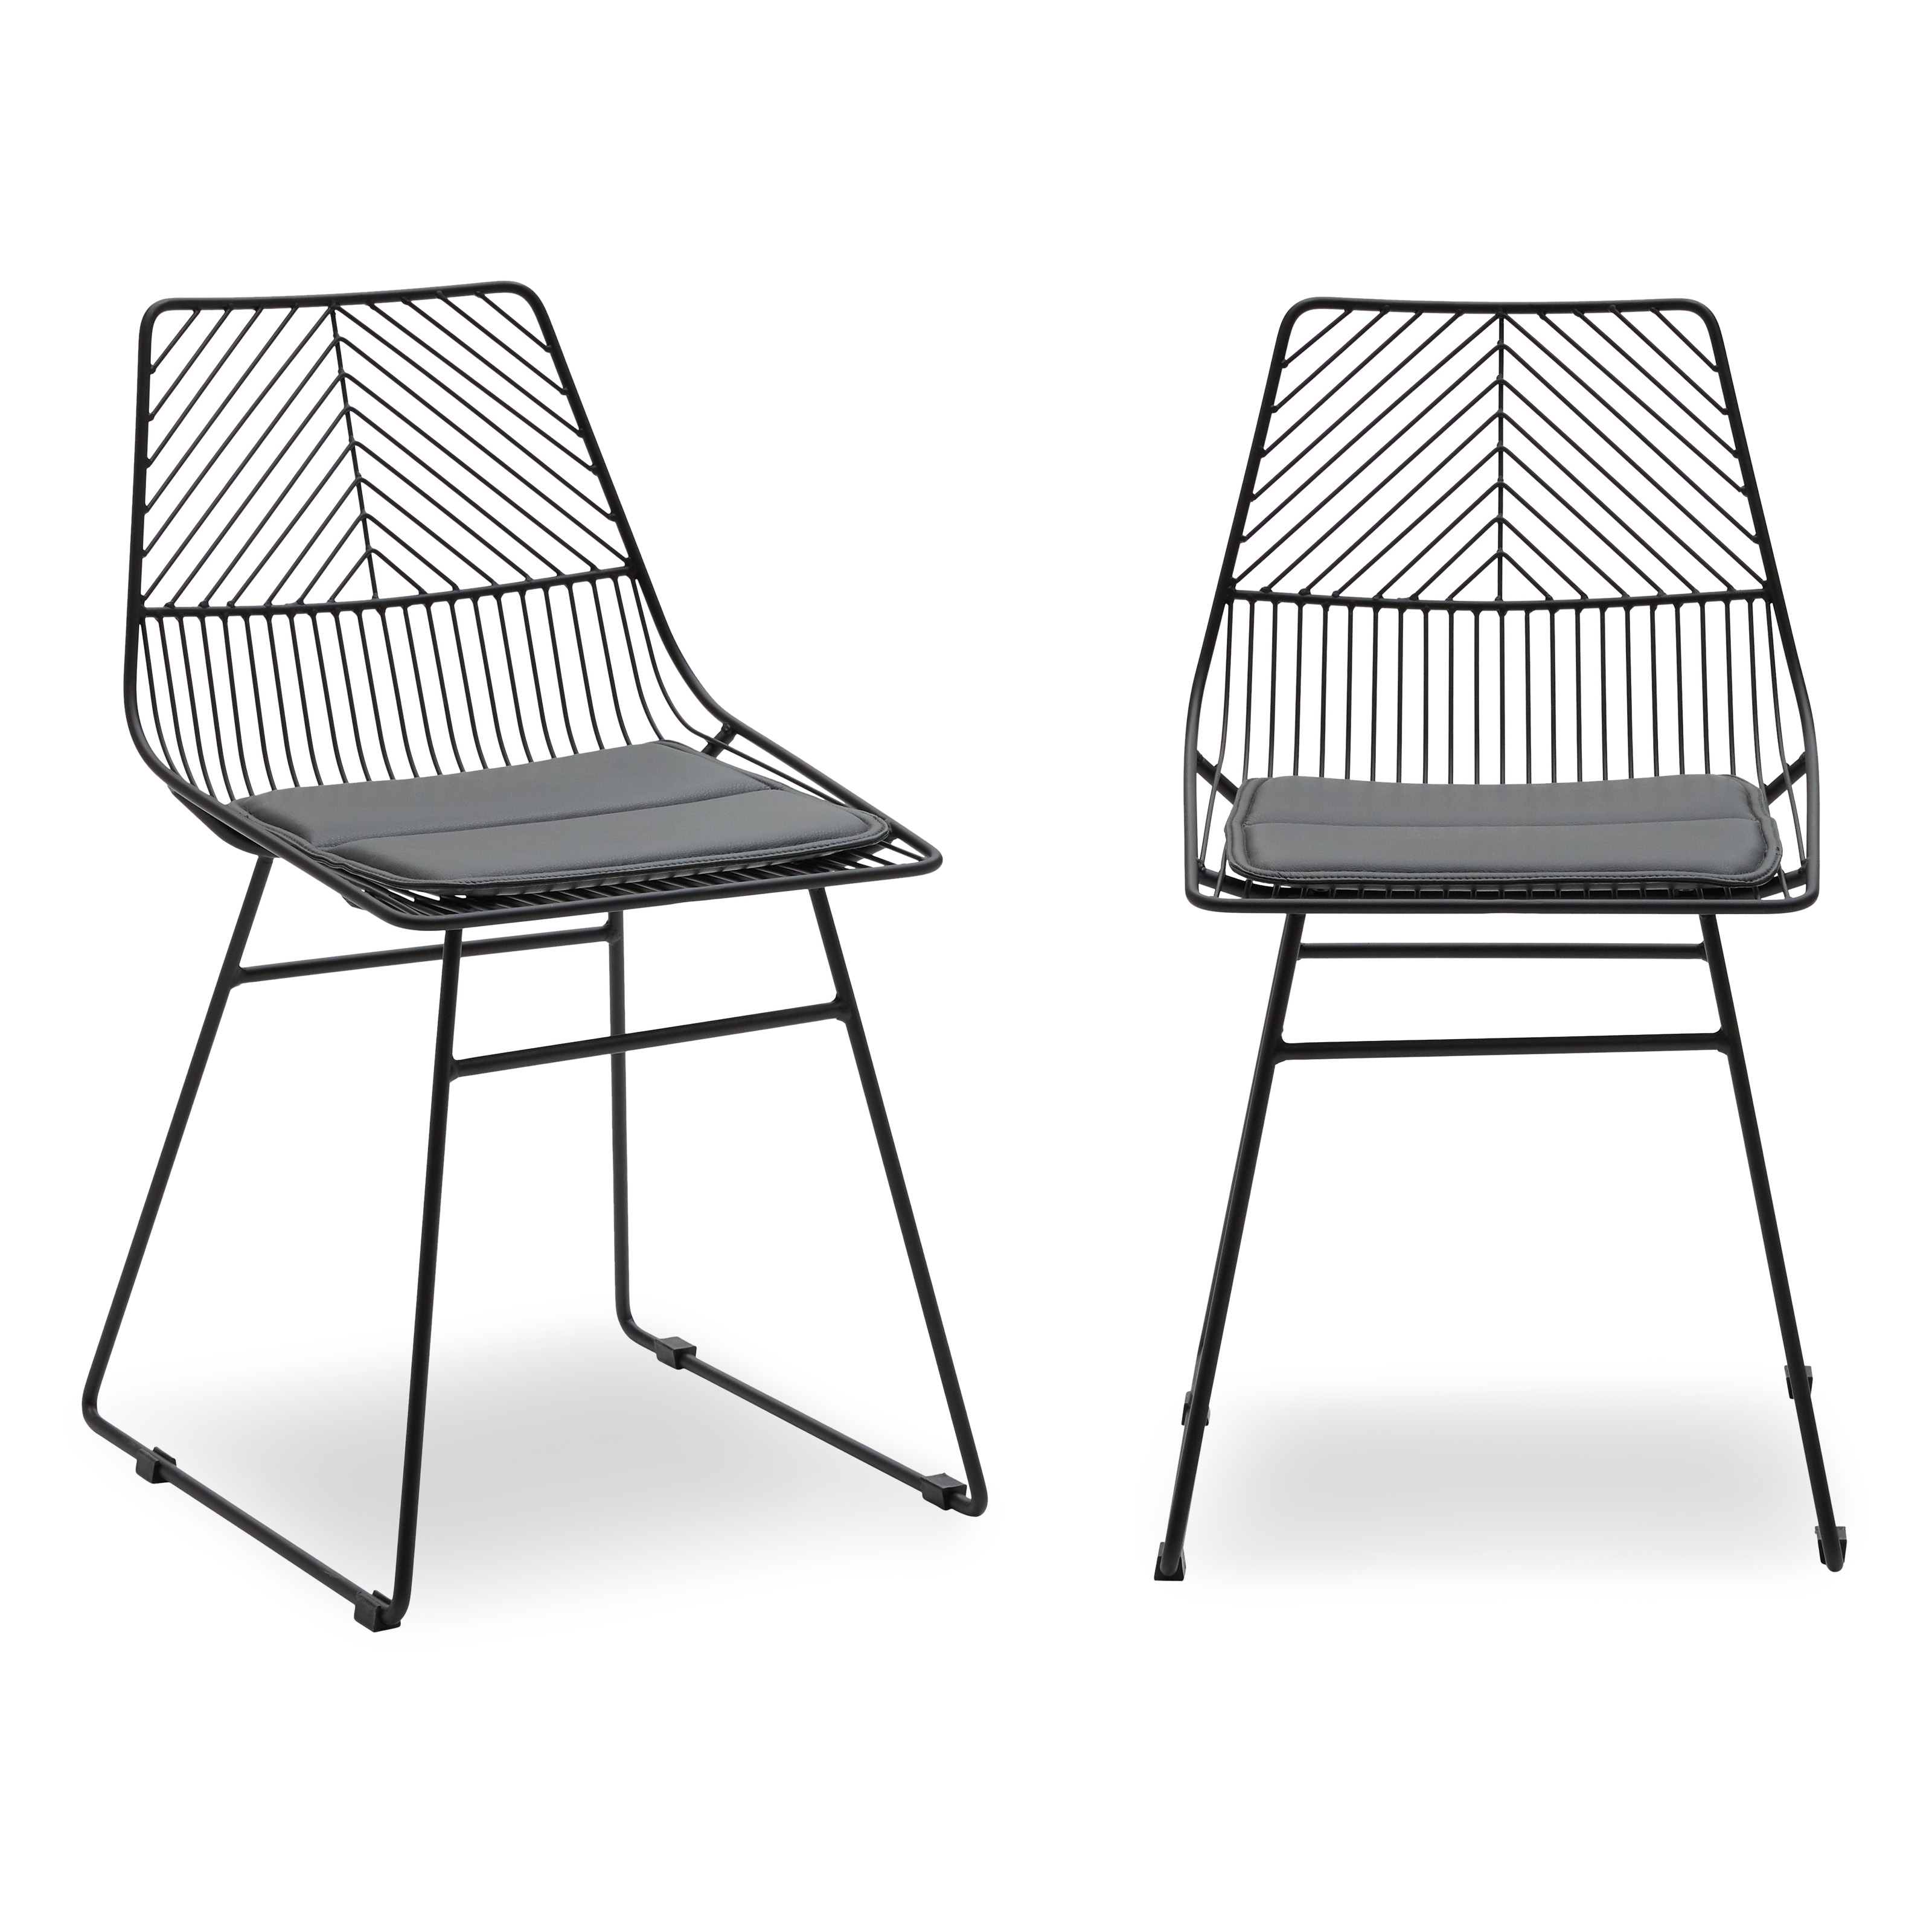 MoDRN Scandinavian Metal Dining Chair with Cushion, Set of 2 - image 1 of 13